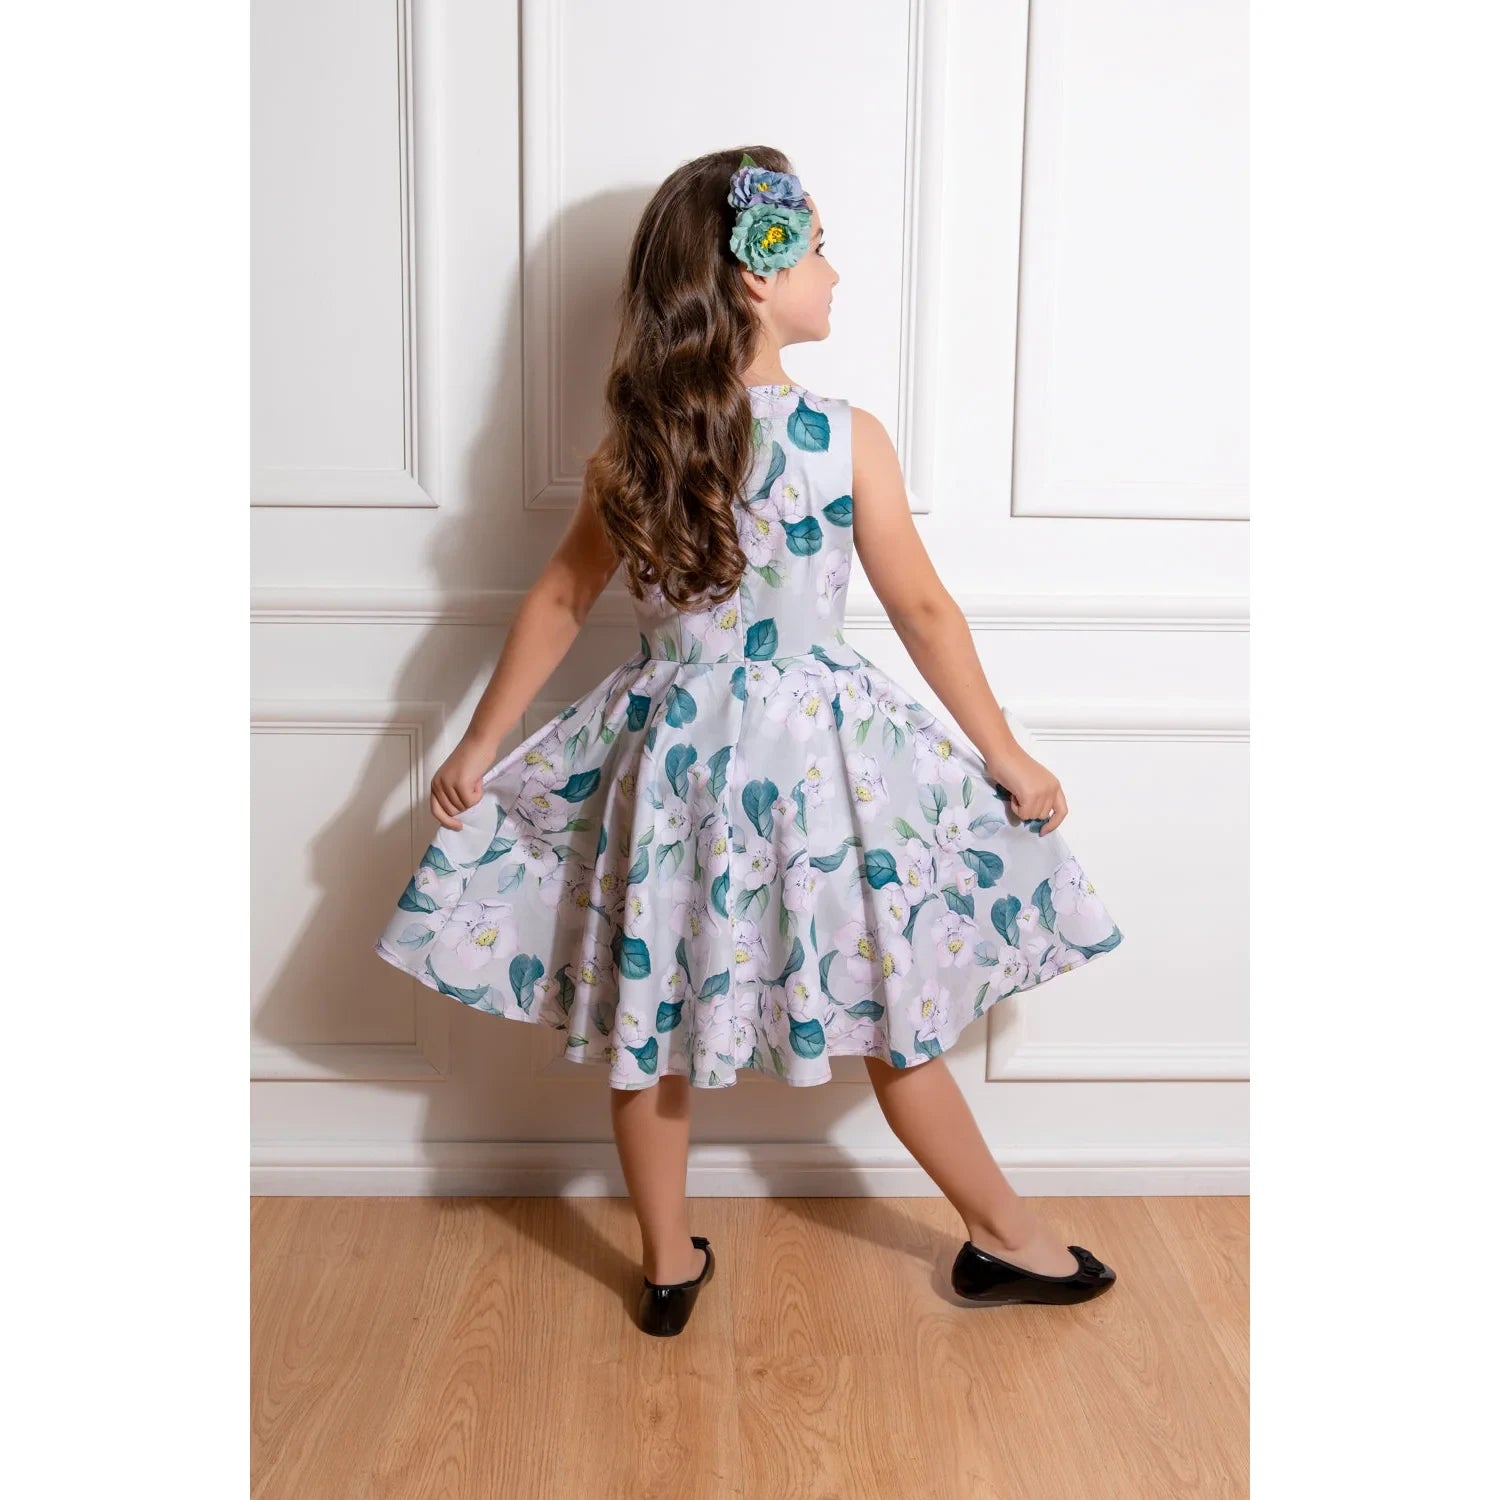 Little Kitty Girl's Pastel Purple Floral Print Party Dress